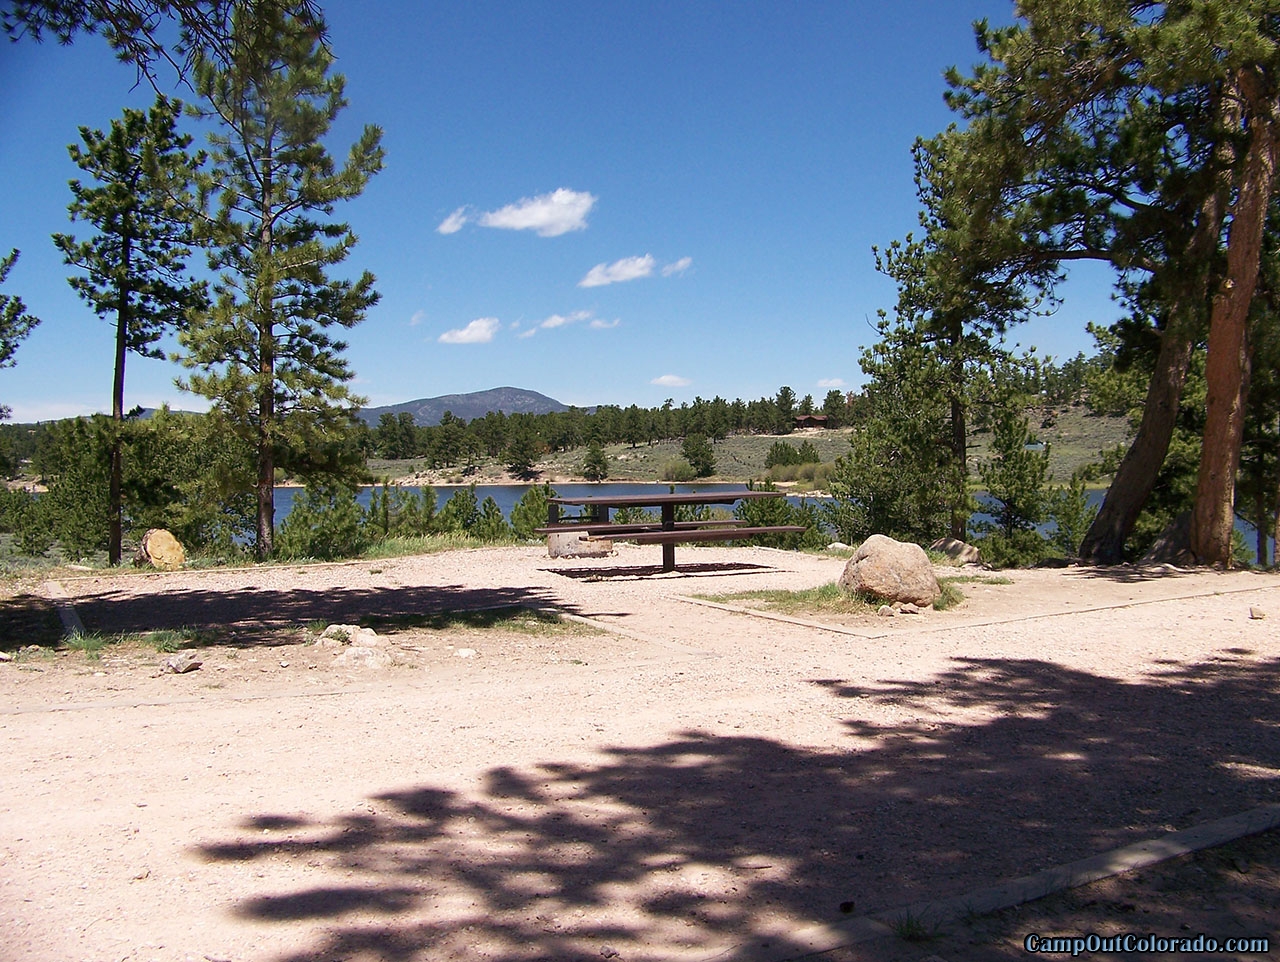 West Lake Campground Camping Review - Great Overnight Camping Spot